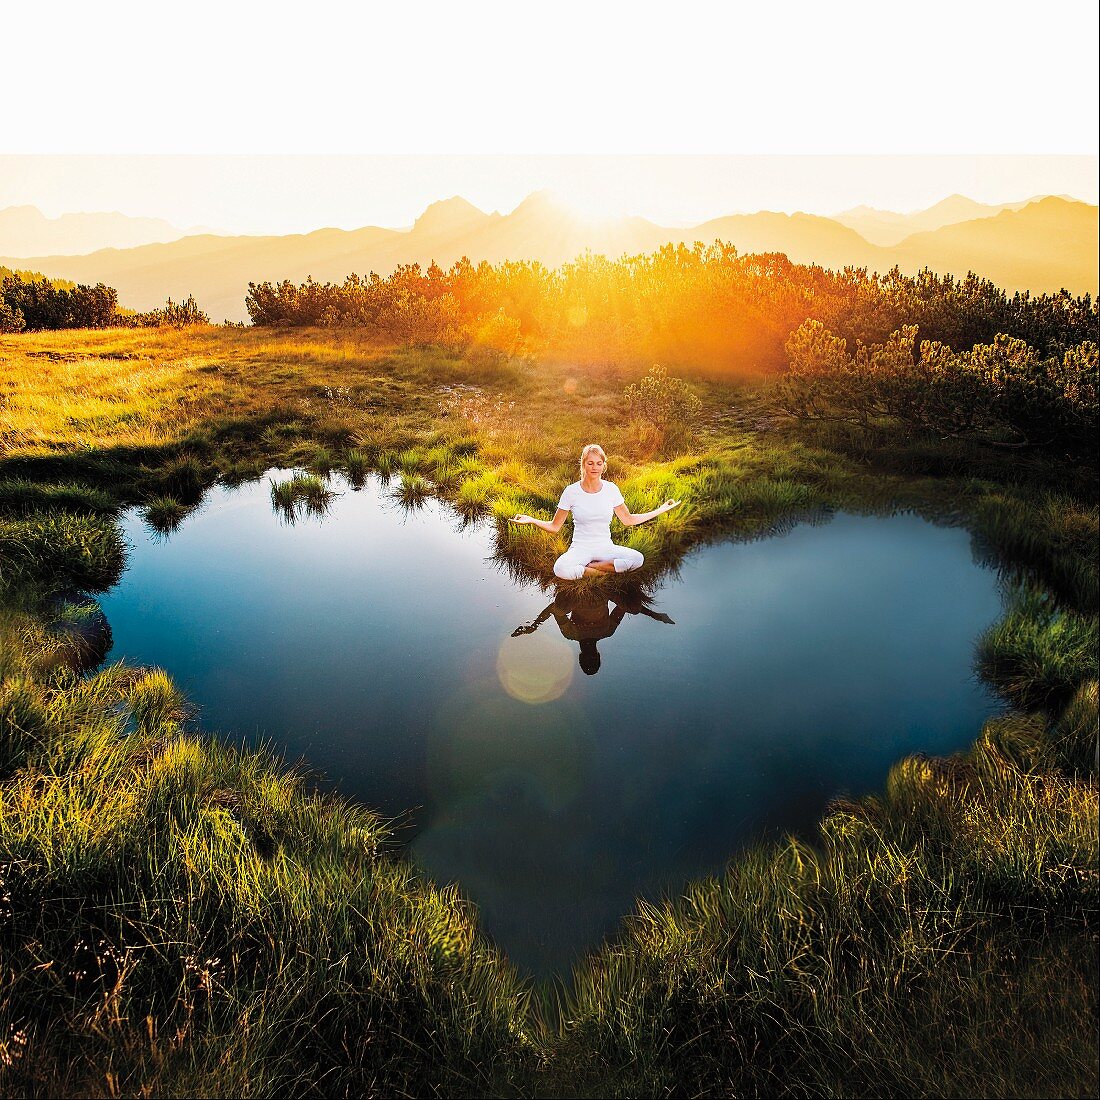 Woman meditating next to heart-shaped mountain pond